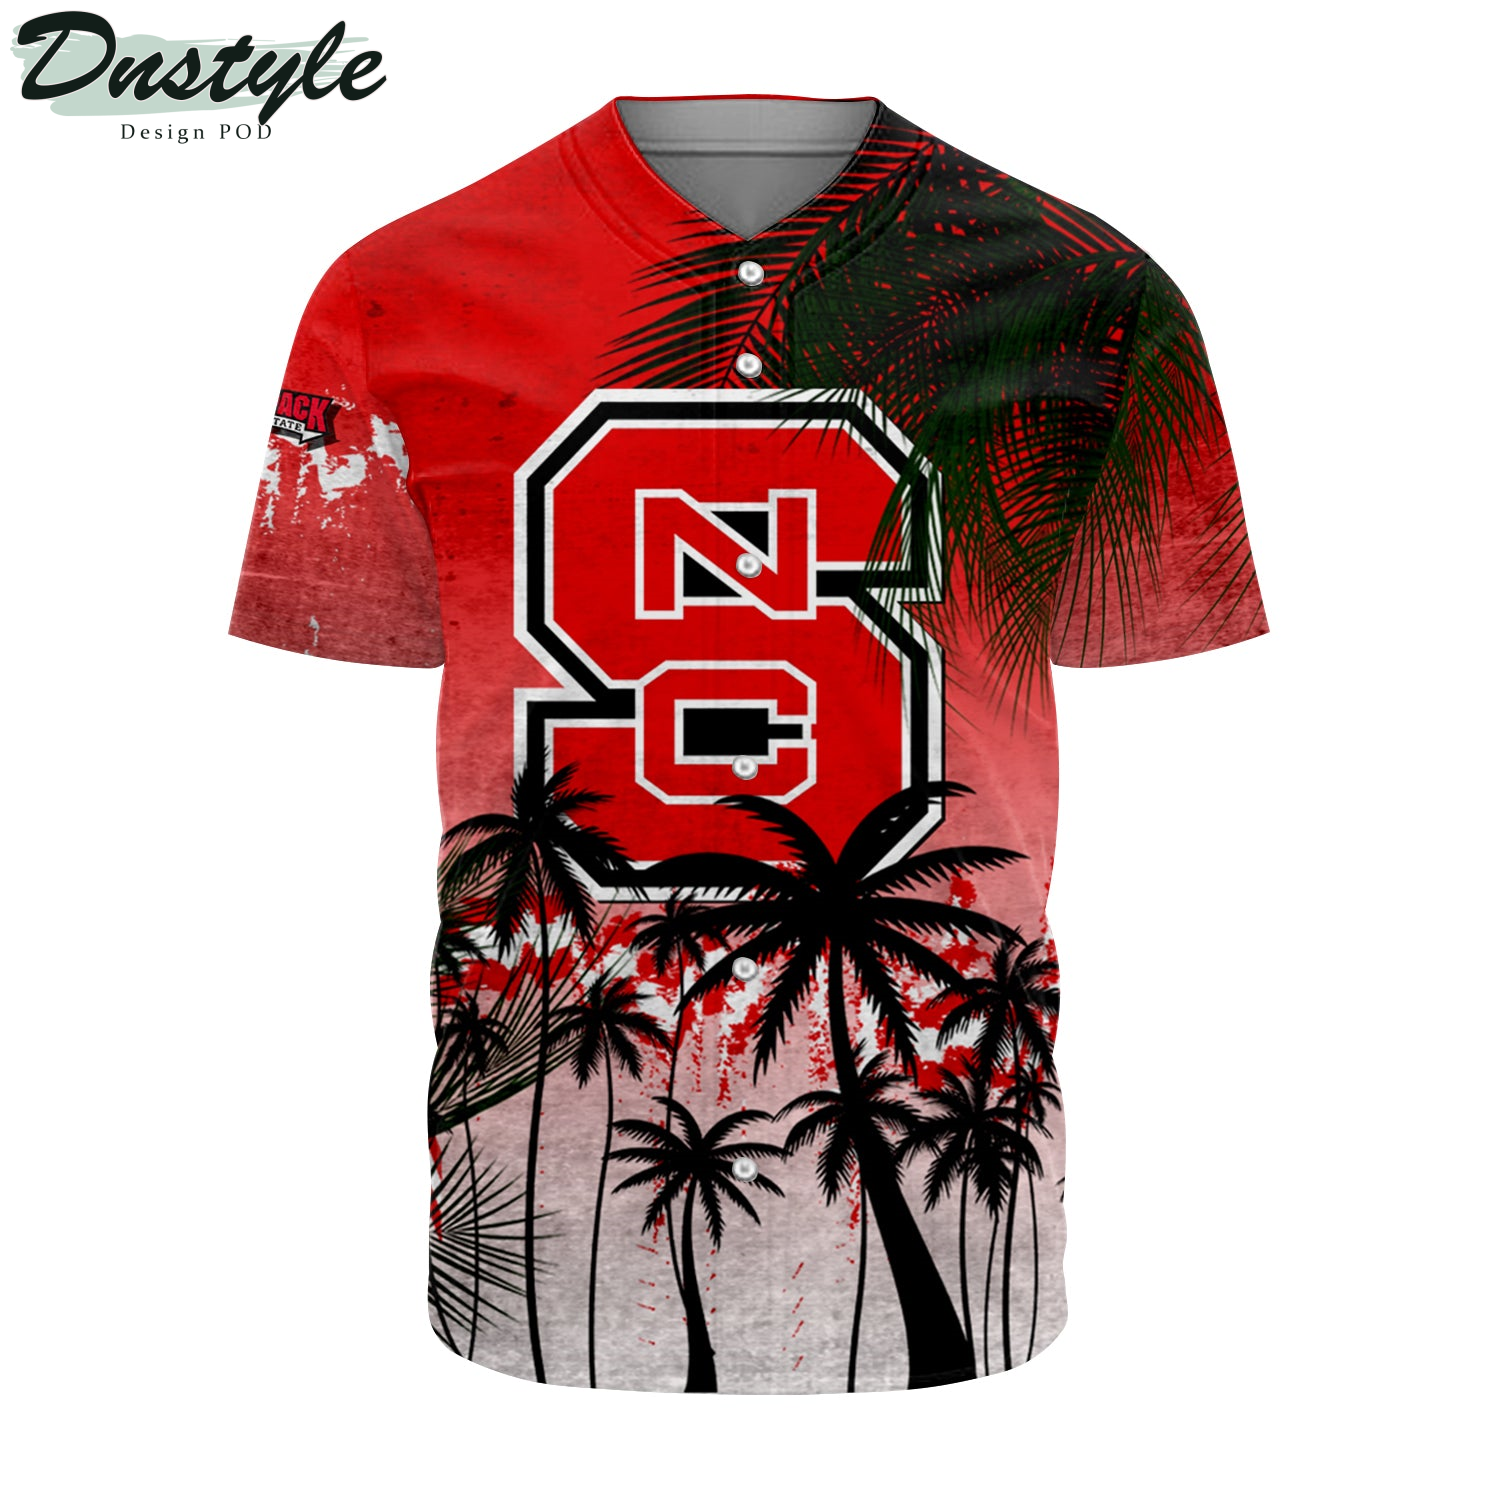 NC State Wolfpack Baseball Jersey Coconut Tree Tropical Grunge